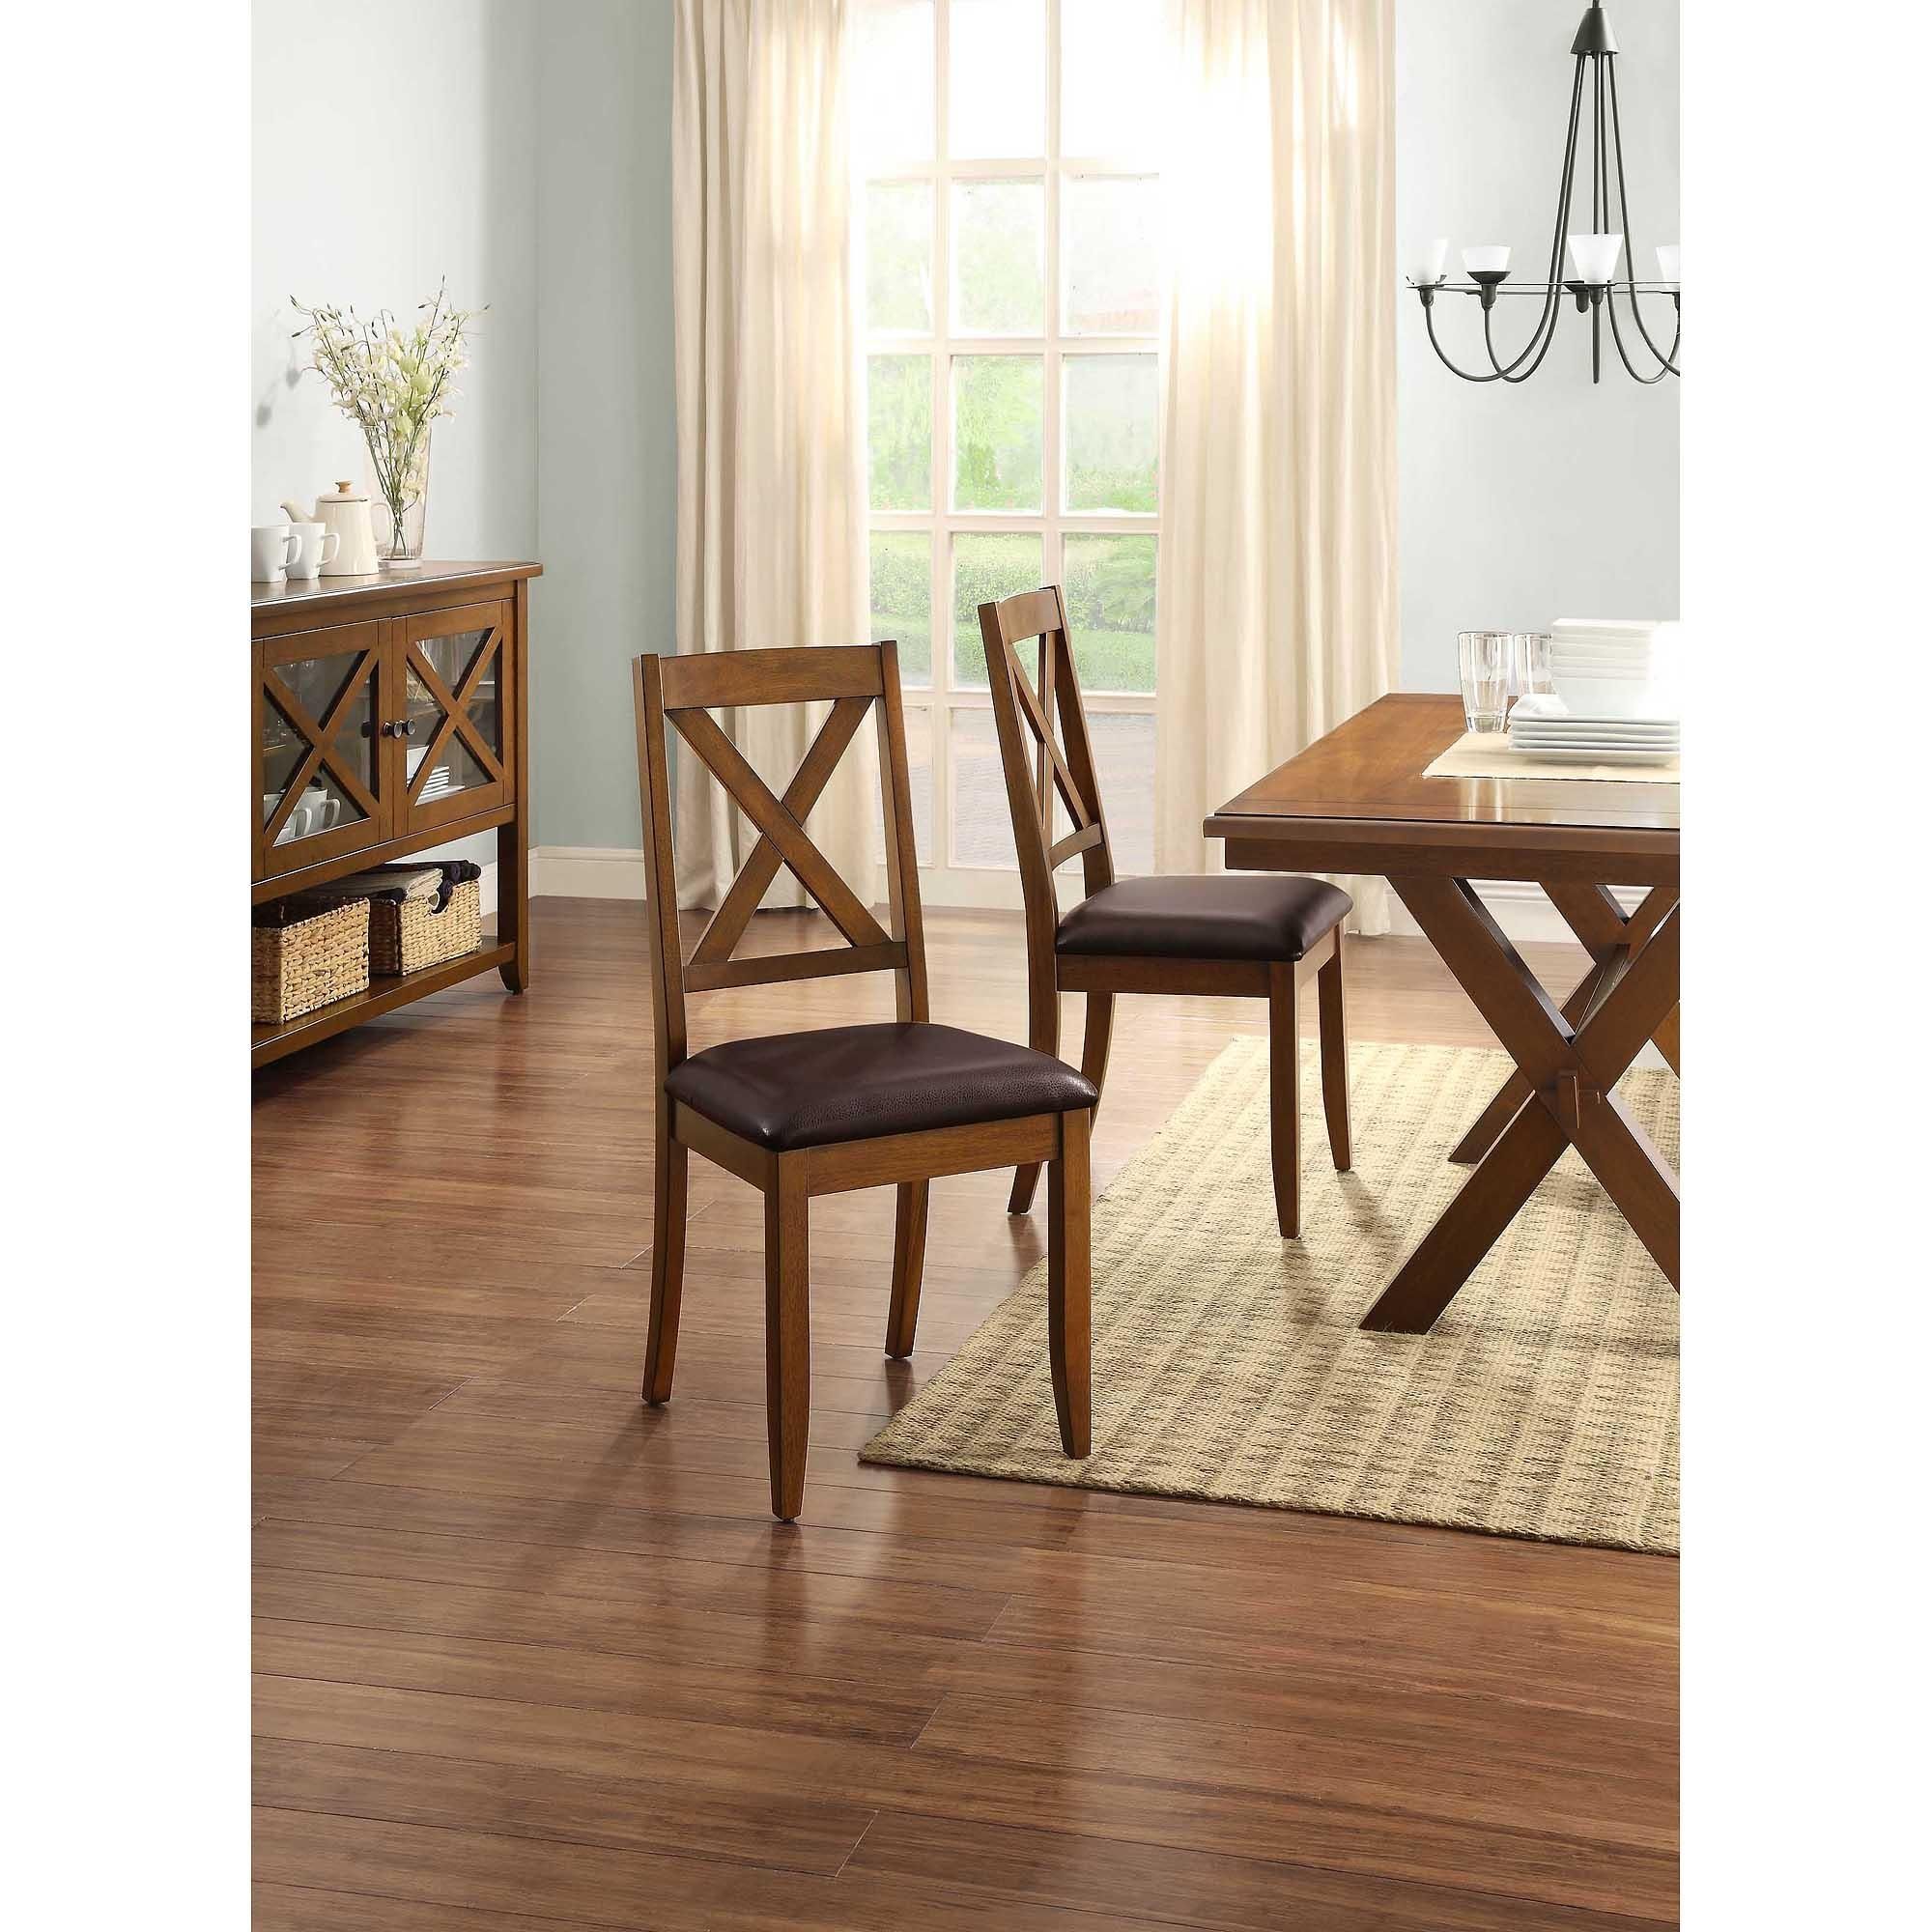 Dining Tables : Walmart Bhg Style Better Homes And Gardens Maddox For Blue Sofa Tabless (View 20 of 20)